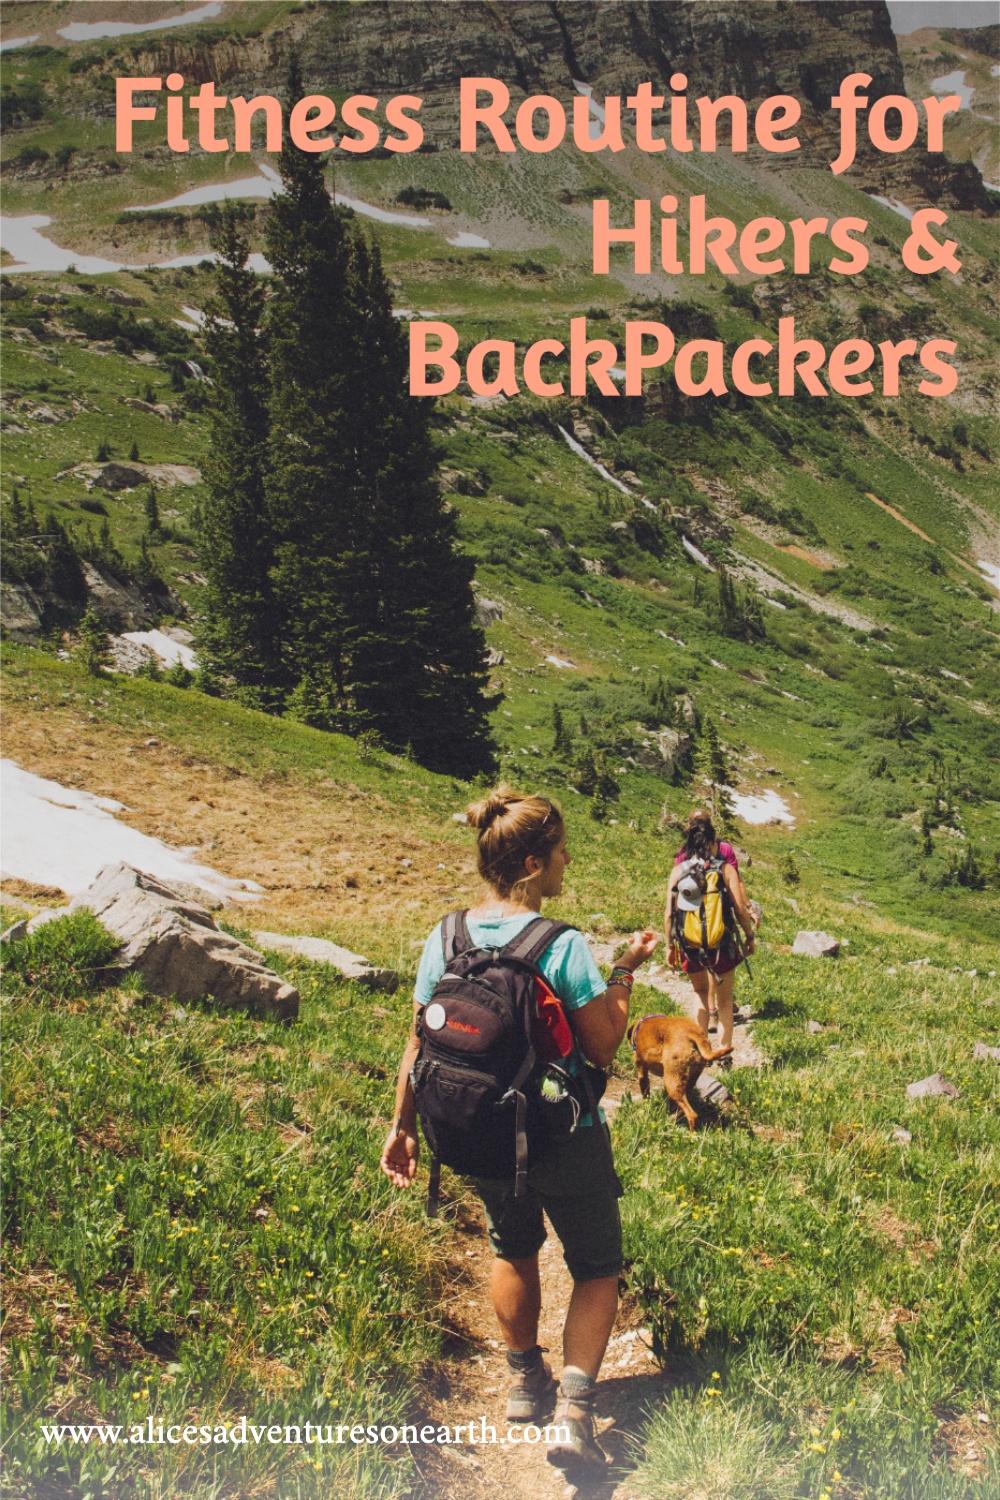 Stay in Shape- A Training Guide for Hikers & Backpackers - ALICE'S  ADVENTURES ON EARTH